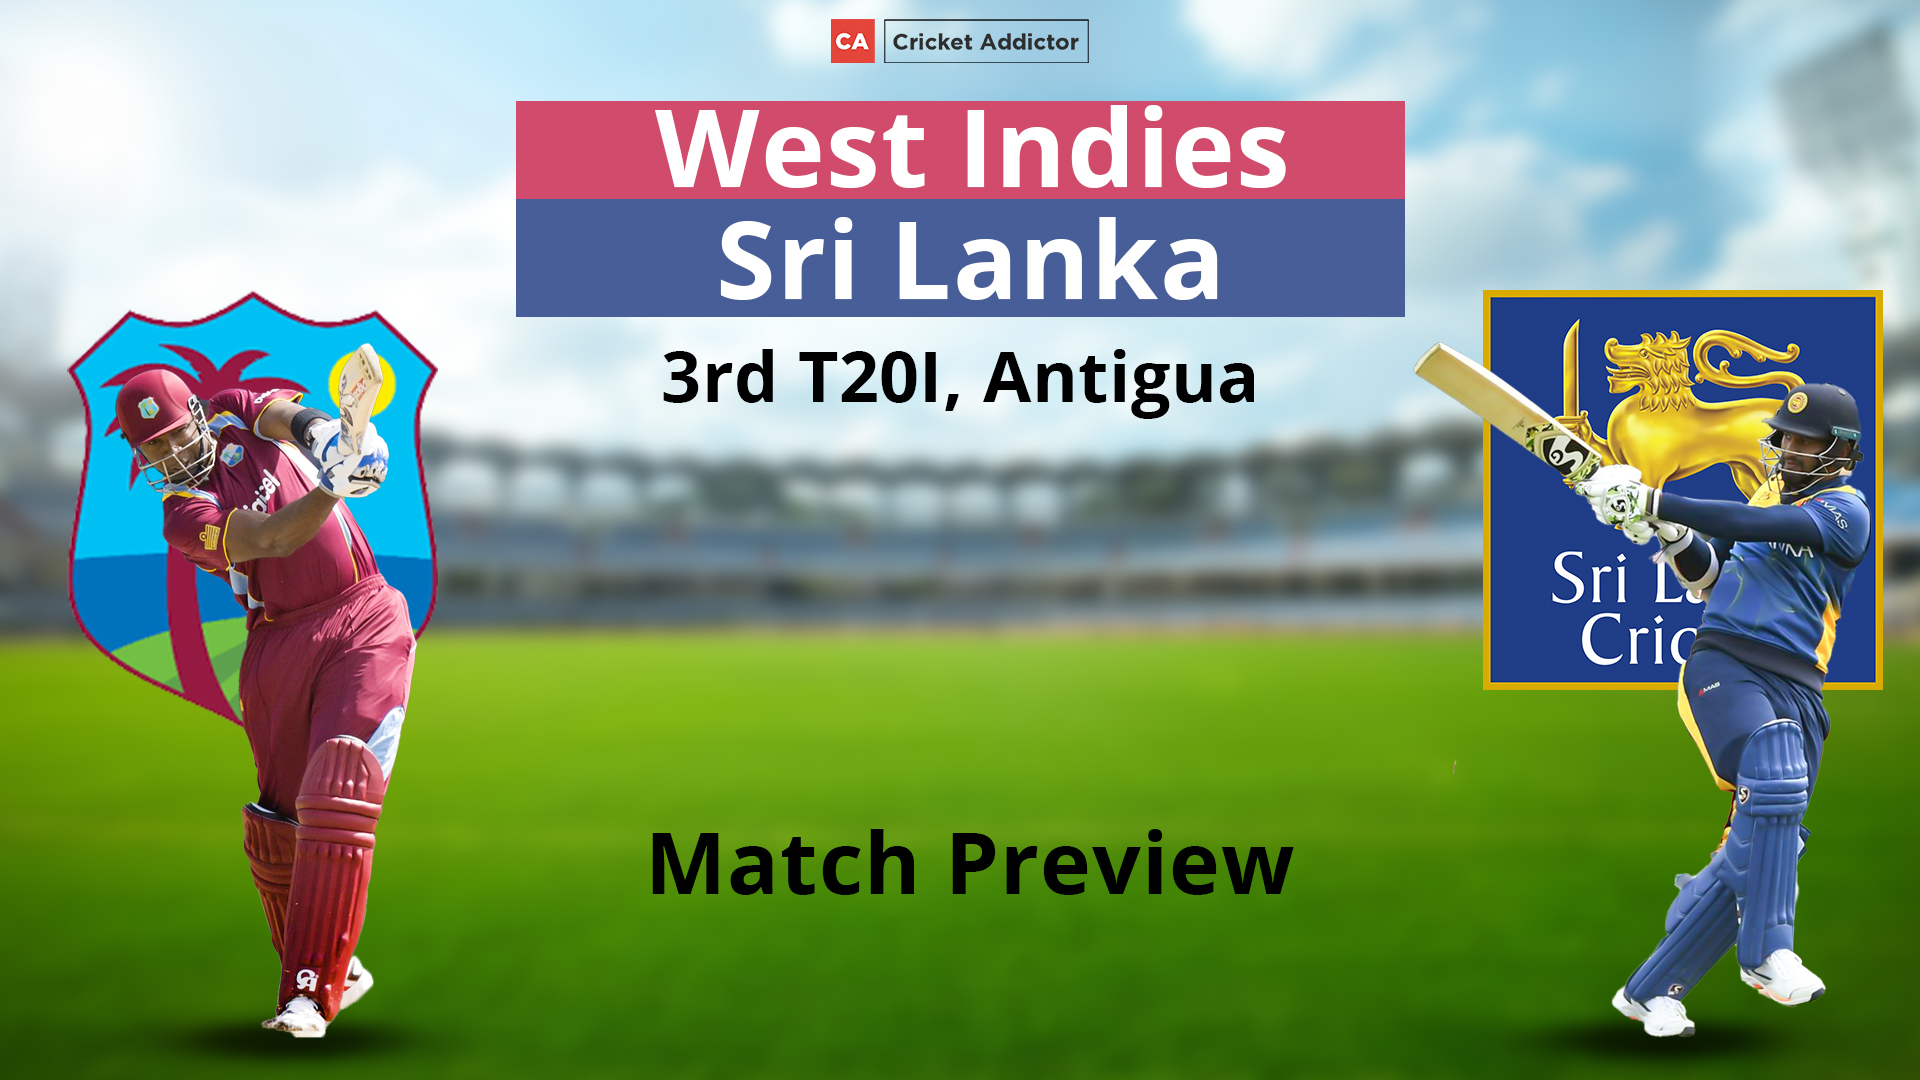 West Indies vs Sri Lanka 2021, 3rd T20I: Match Preview And Prediction